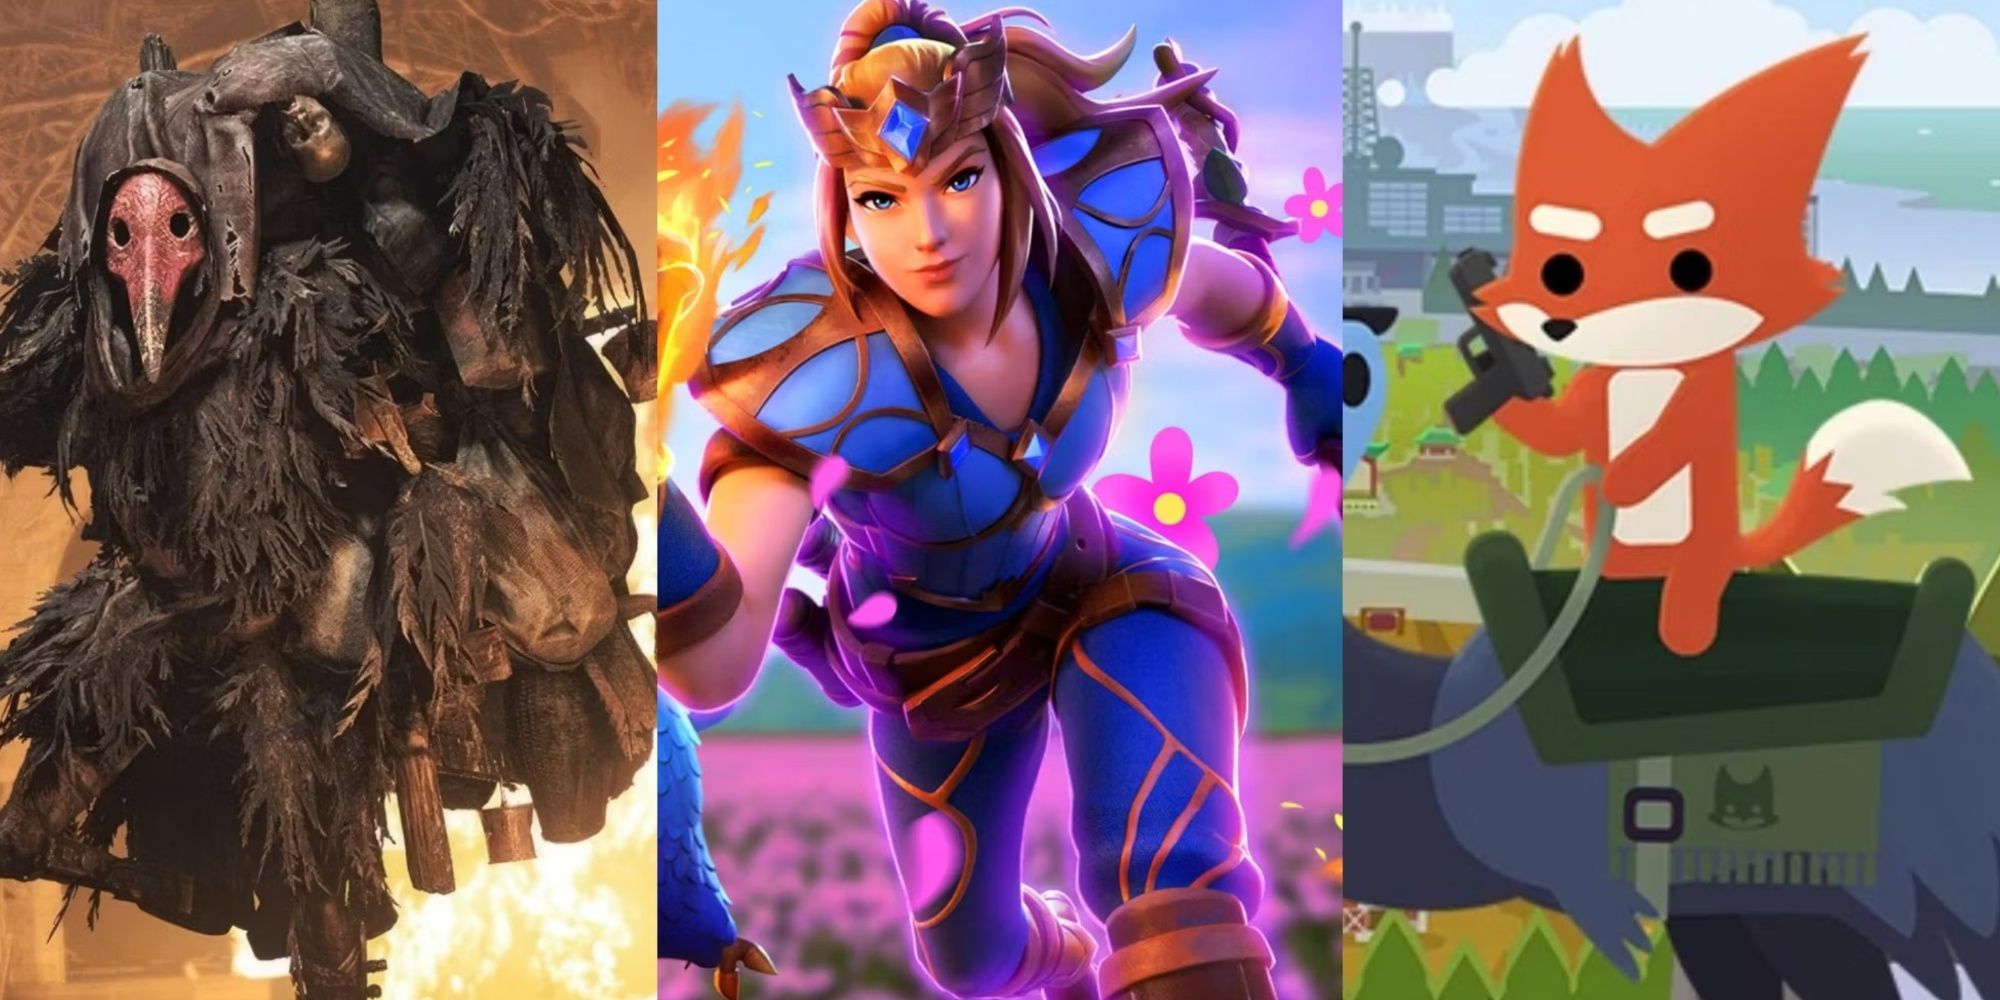 A collage showing three different games that are Battle Royales, with a Fortnite character at the center.